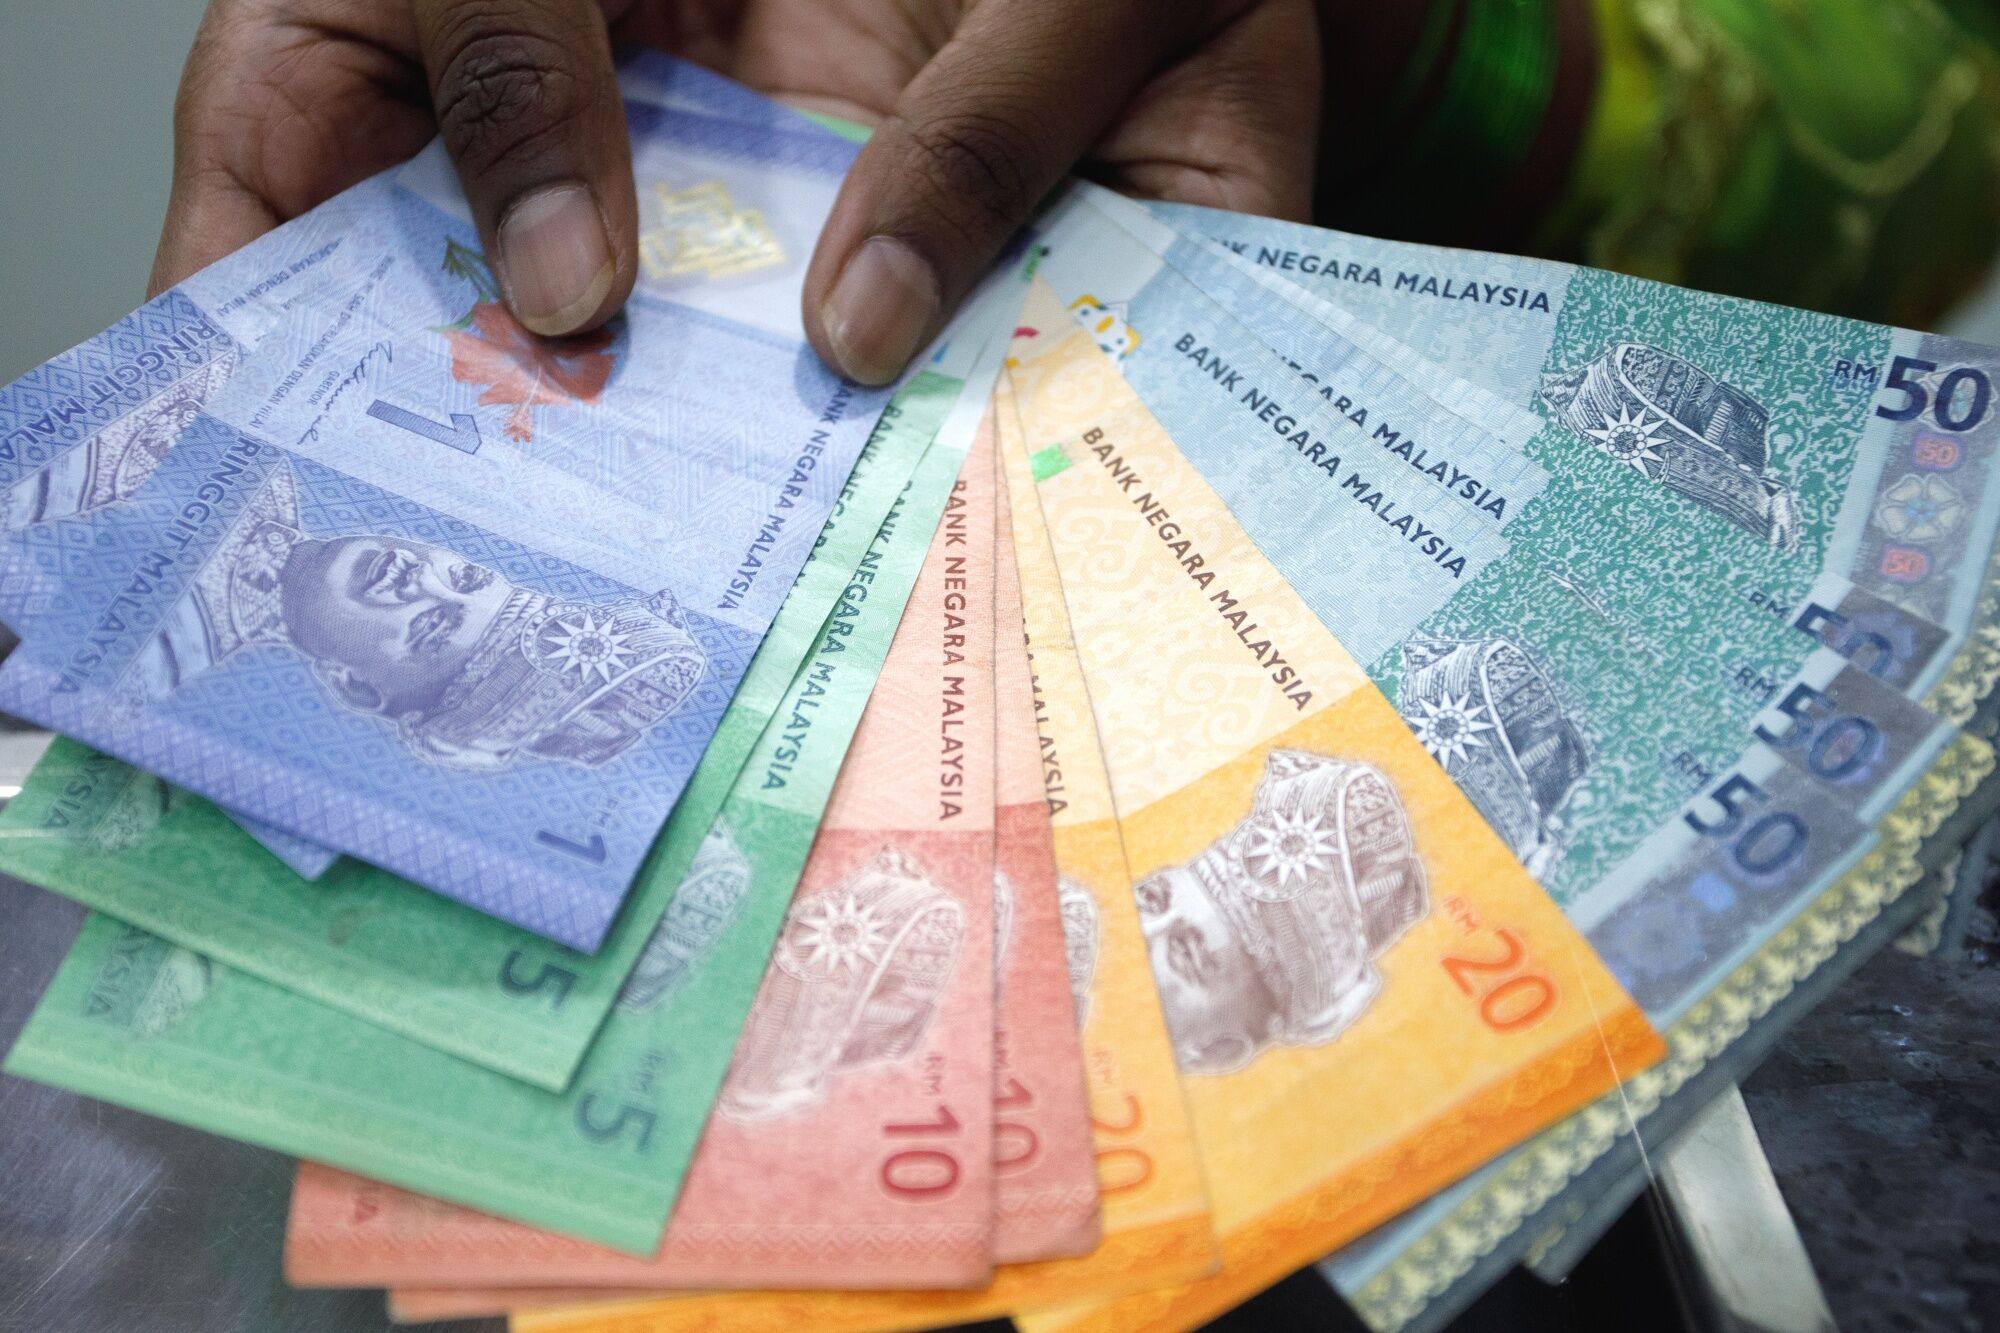 Malaysian ringgit banknotes are seen at a currency exchange in Kuala Lumpur. Malaysia’s currency is nearing a level last seen during the Asian financial crisis in 1998. Photo: Bloomberg